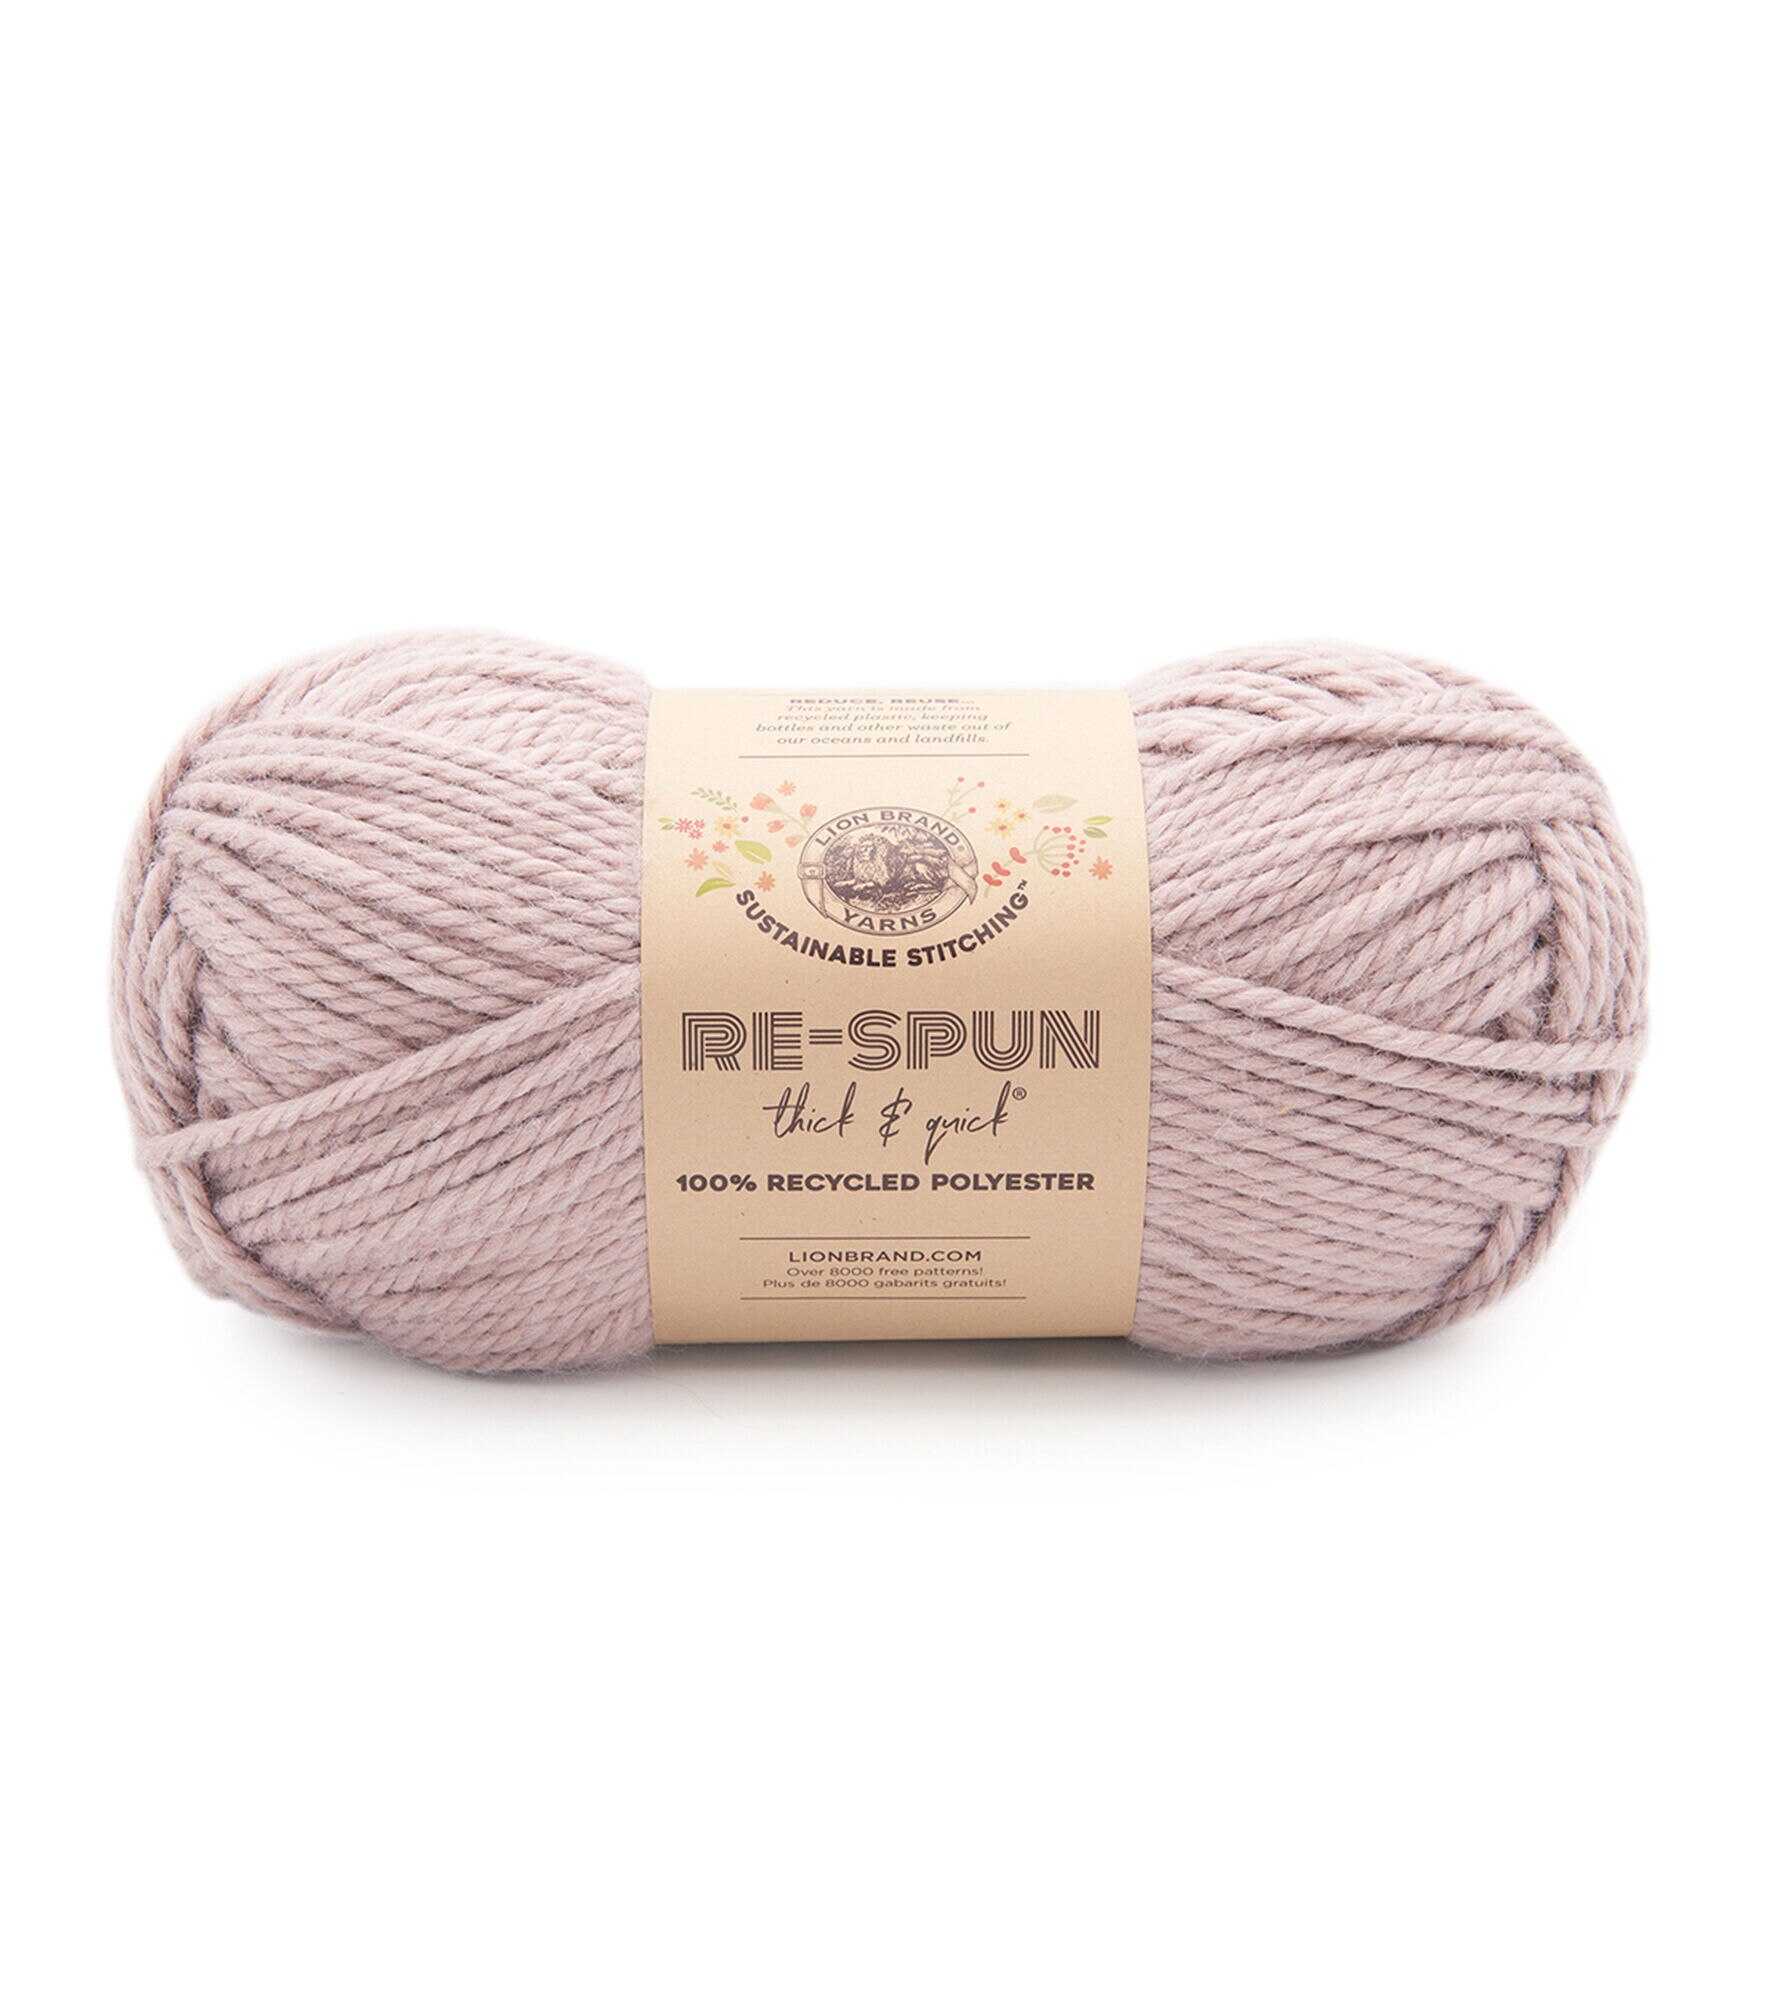 Lion Brand Re-Spun Thick & Quick 223yds Super Bulky Polyester Yarn, Wisteria, hi-res